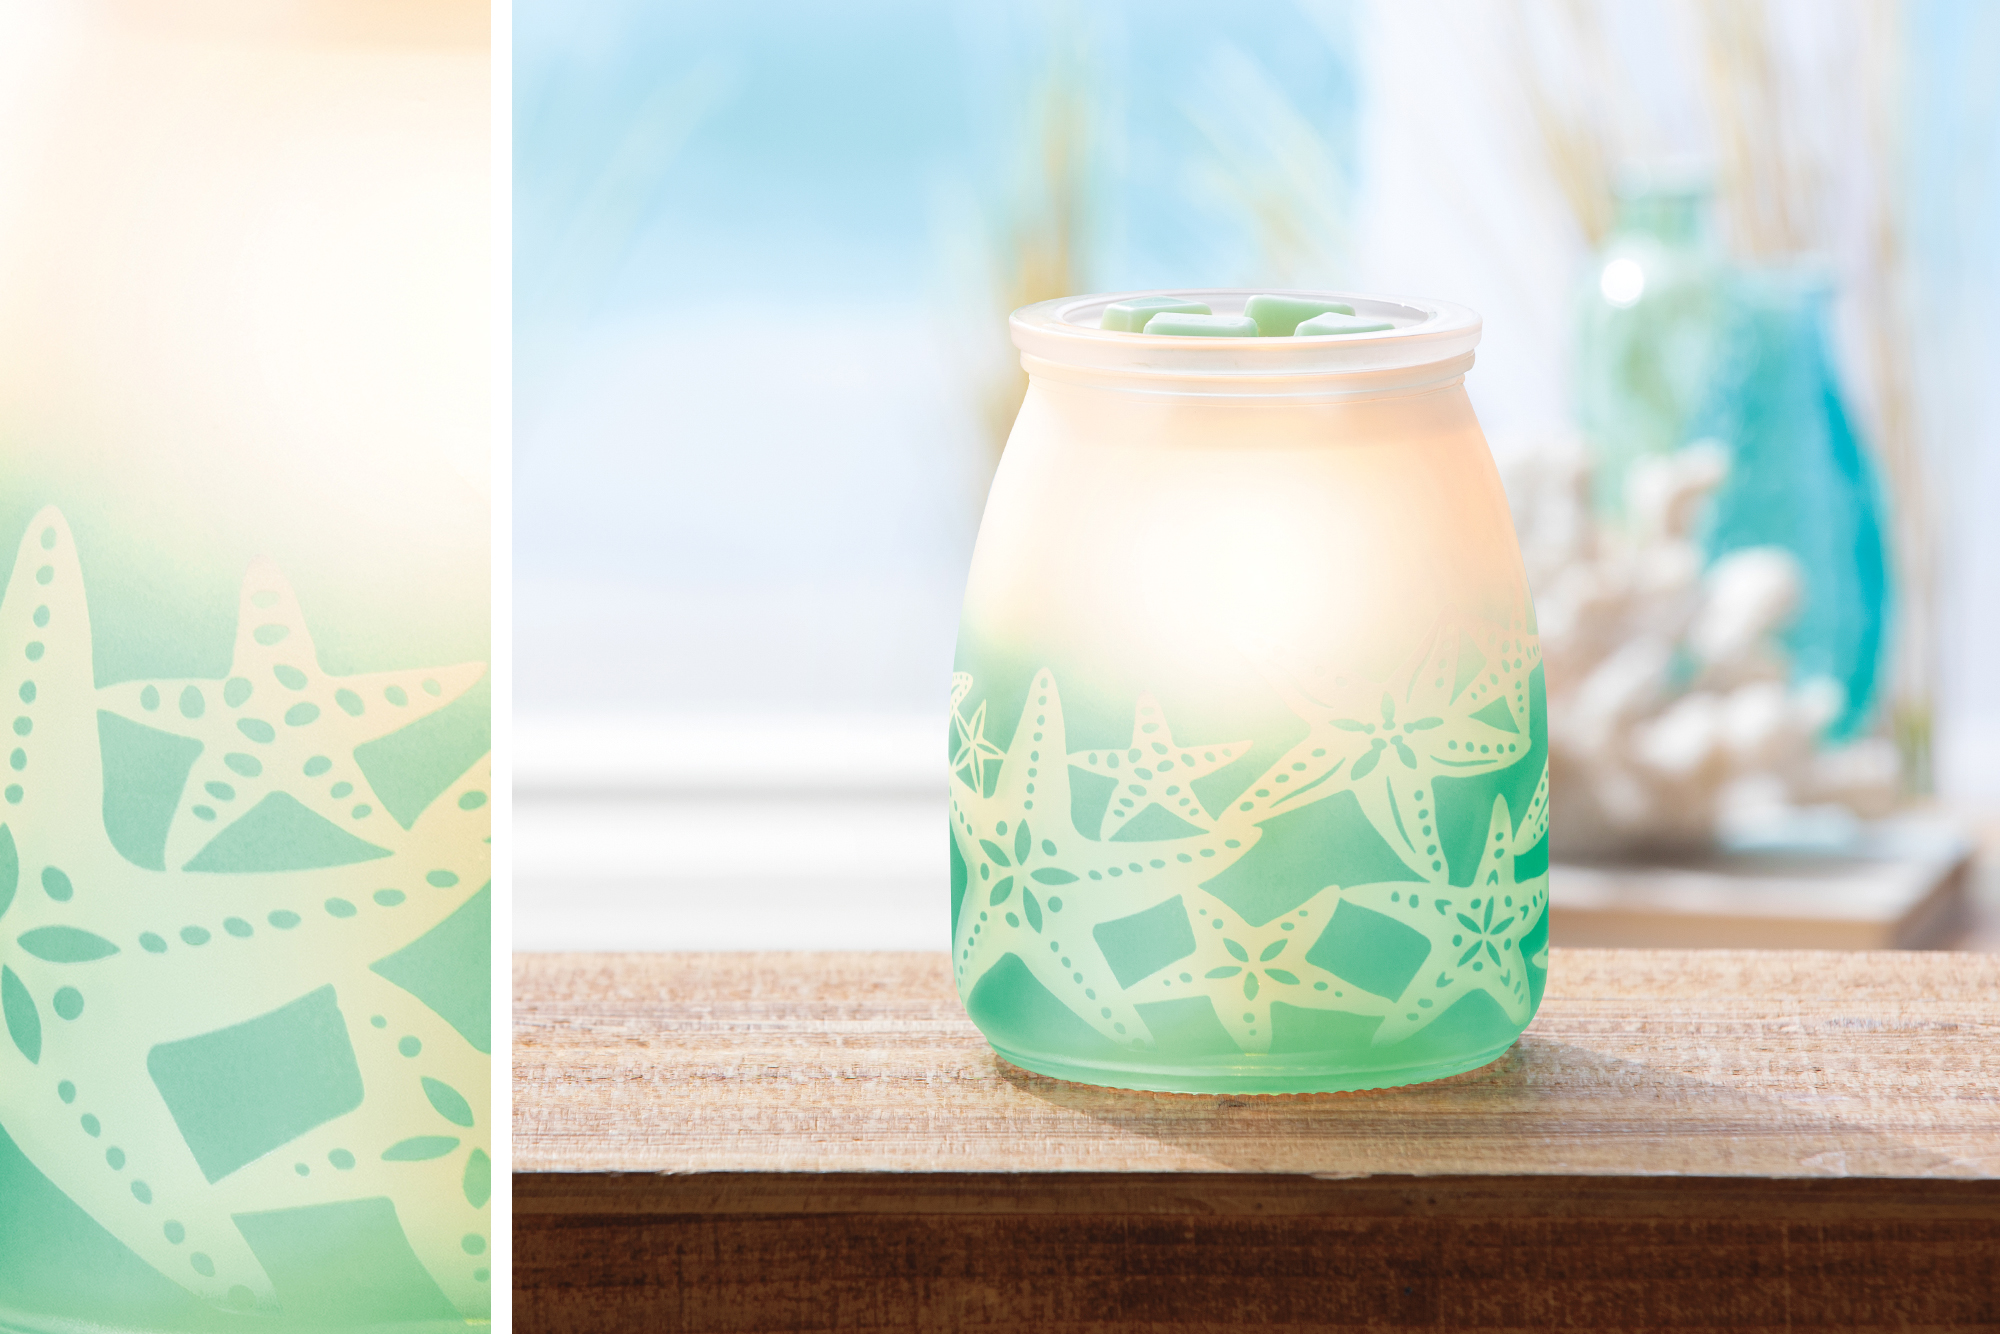 Scentsy Warmers to create a splash of serenity